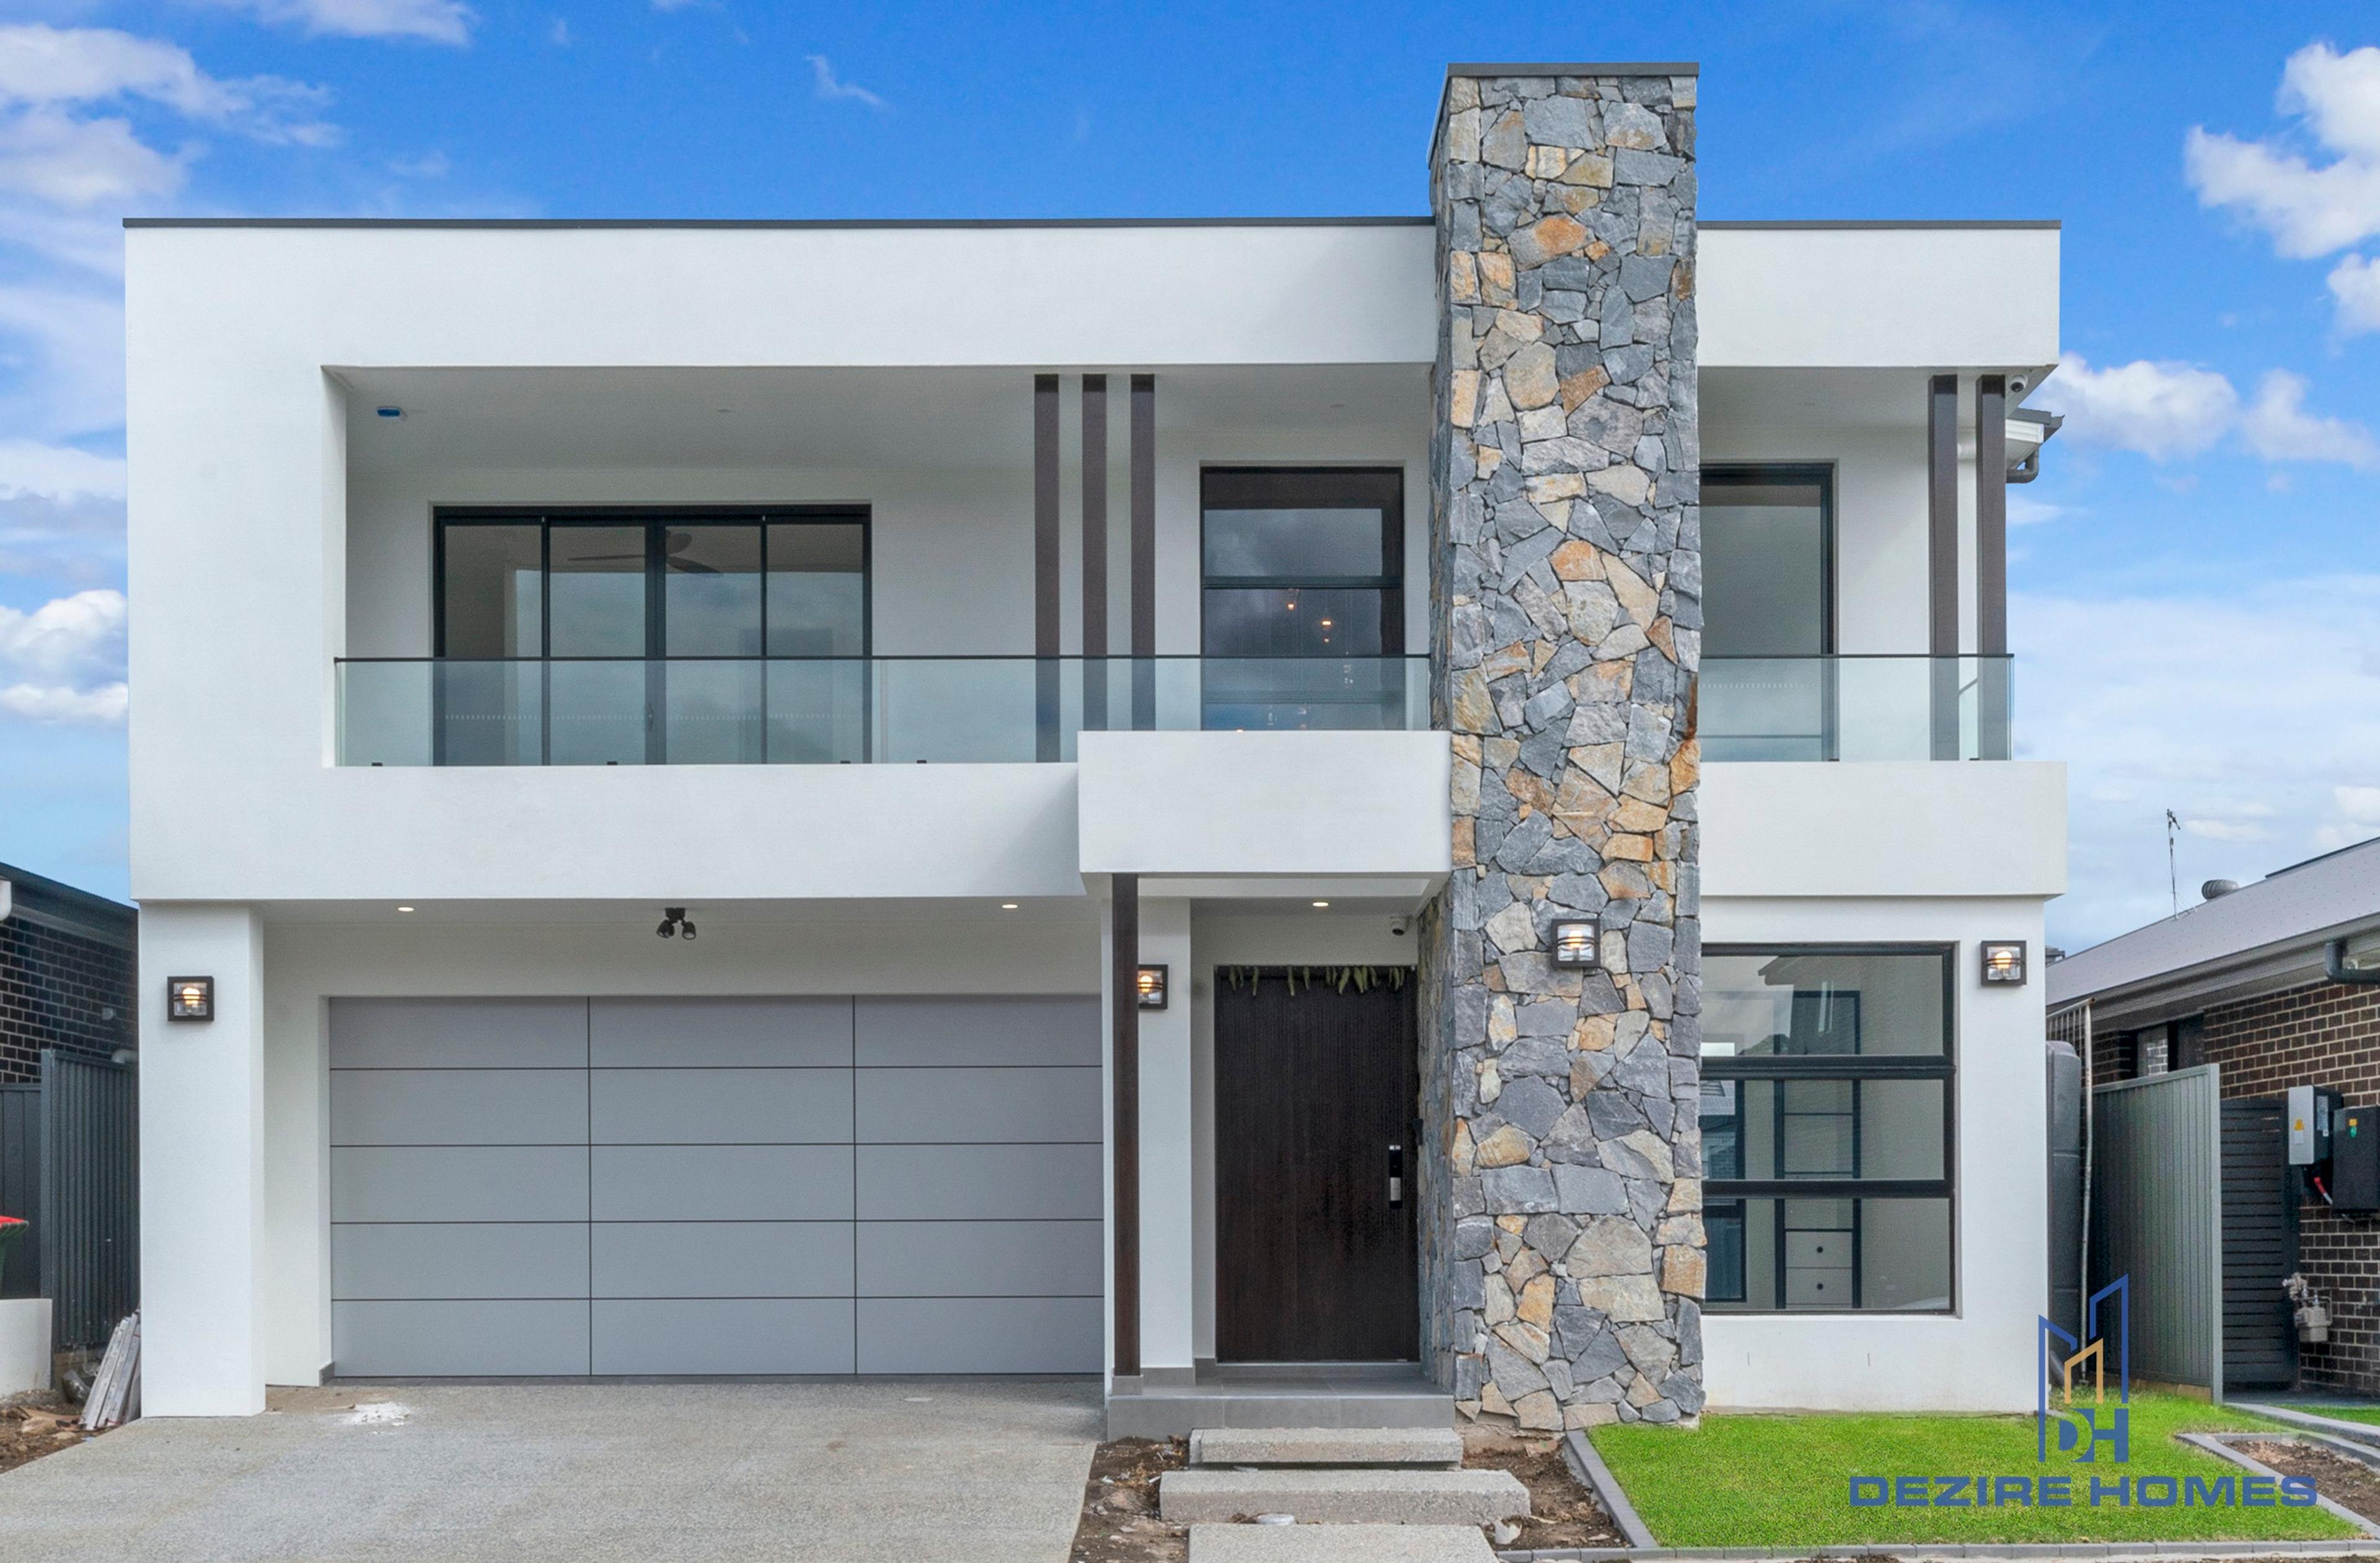 Double storey modern home with stacked stone facade and white exteriors